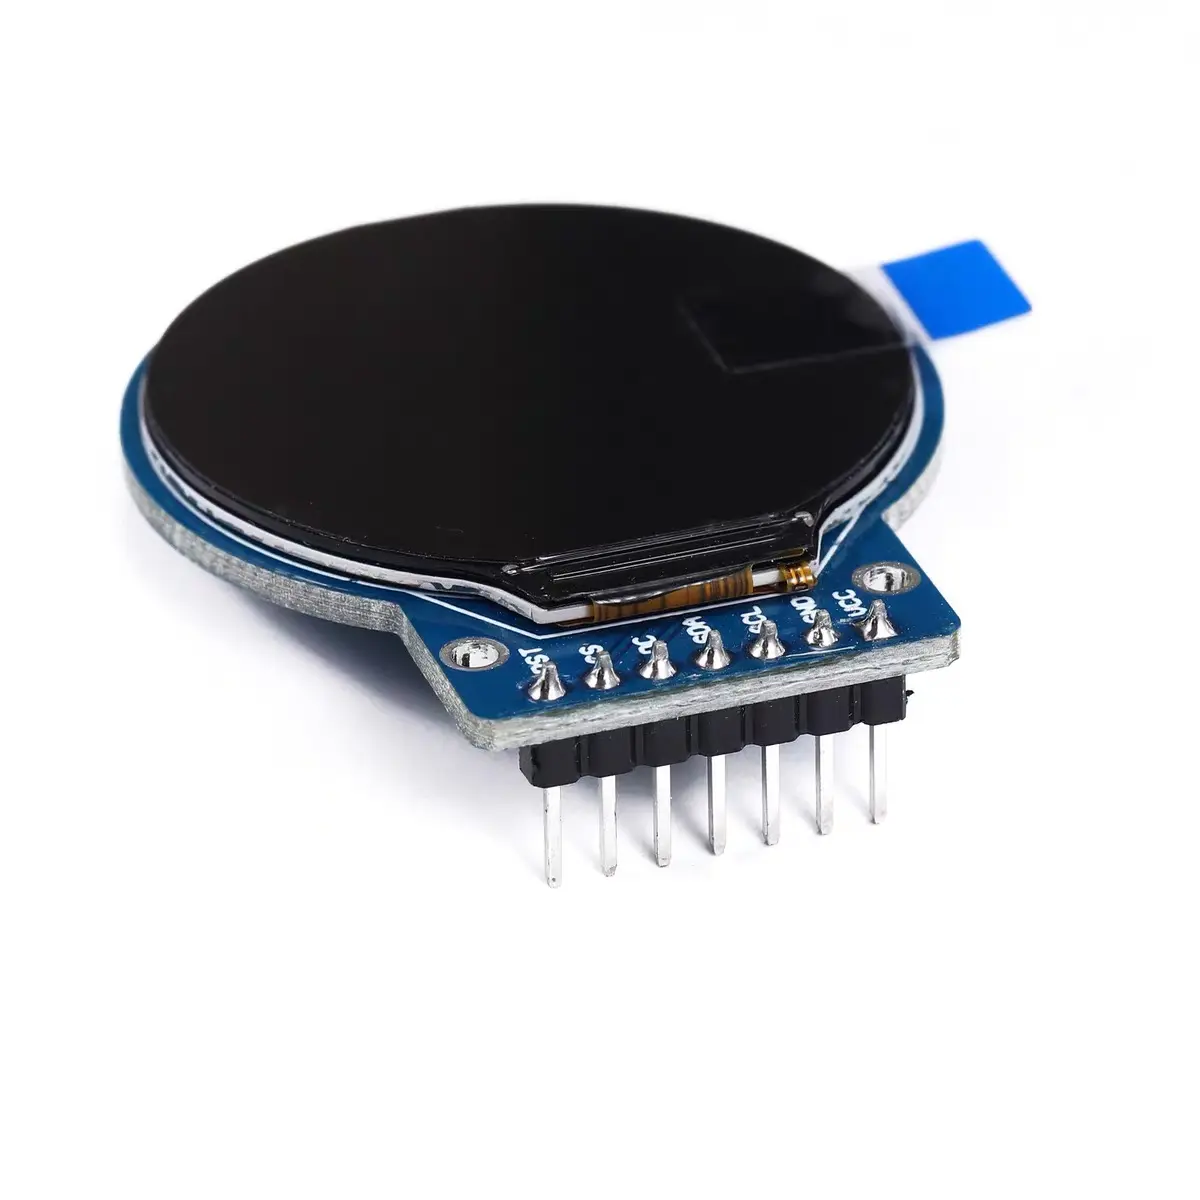 1.28 Size Round screen TFT module 240-240 HD IPS full viewing Angle LCD display